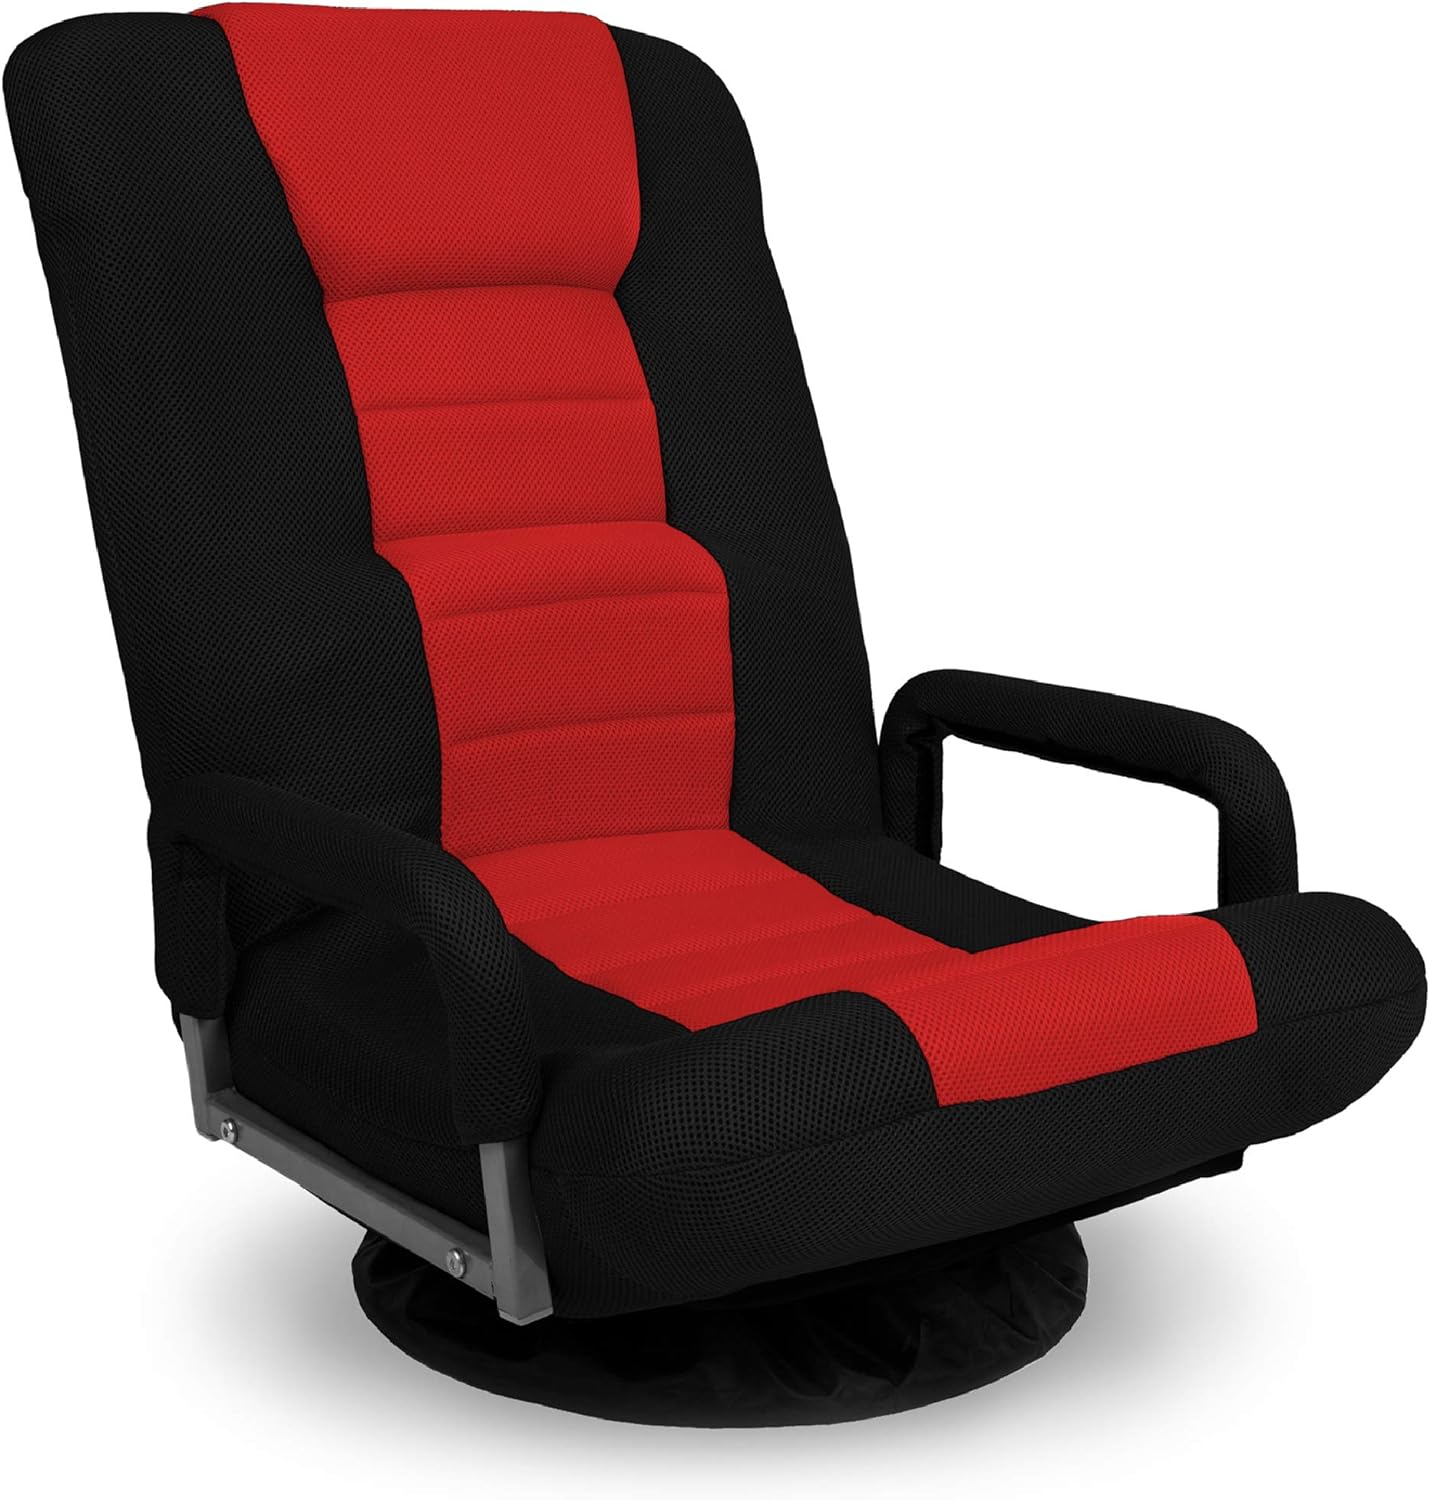 Best Choice Products Swivel Gaming Chair 360 Degree Multipurpose Floor Chair Rocker for TV, Reading, Playing Video Games w/Lumbar Support, Armrest Handles, Adjustable Backrest - Black/Red